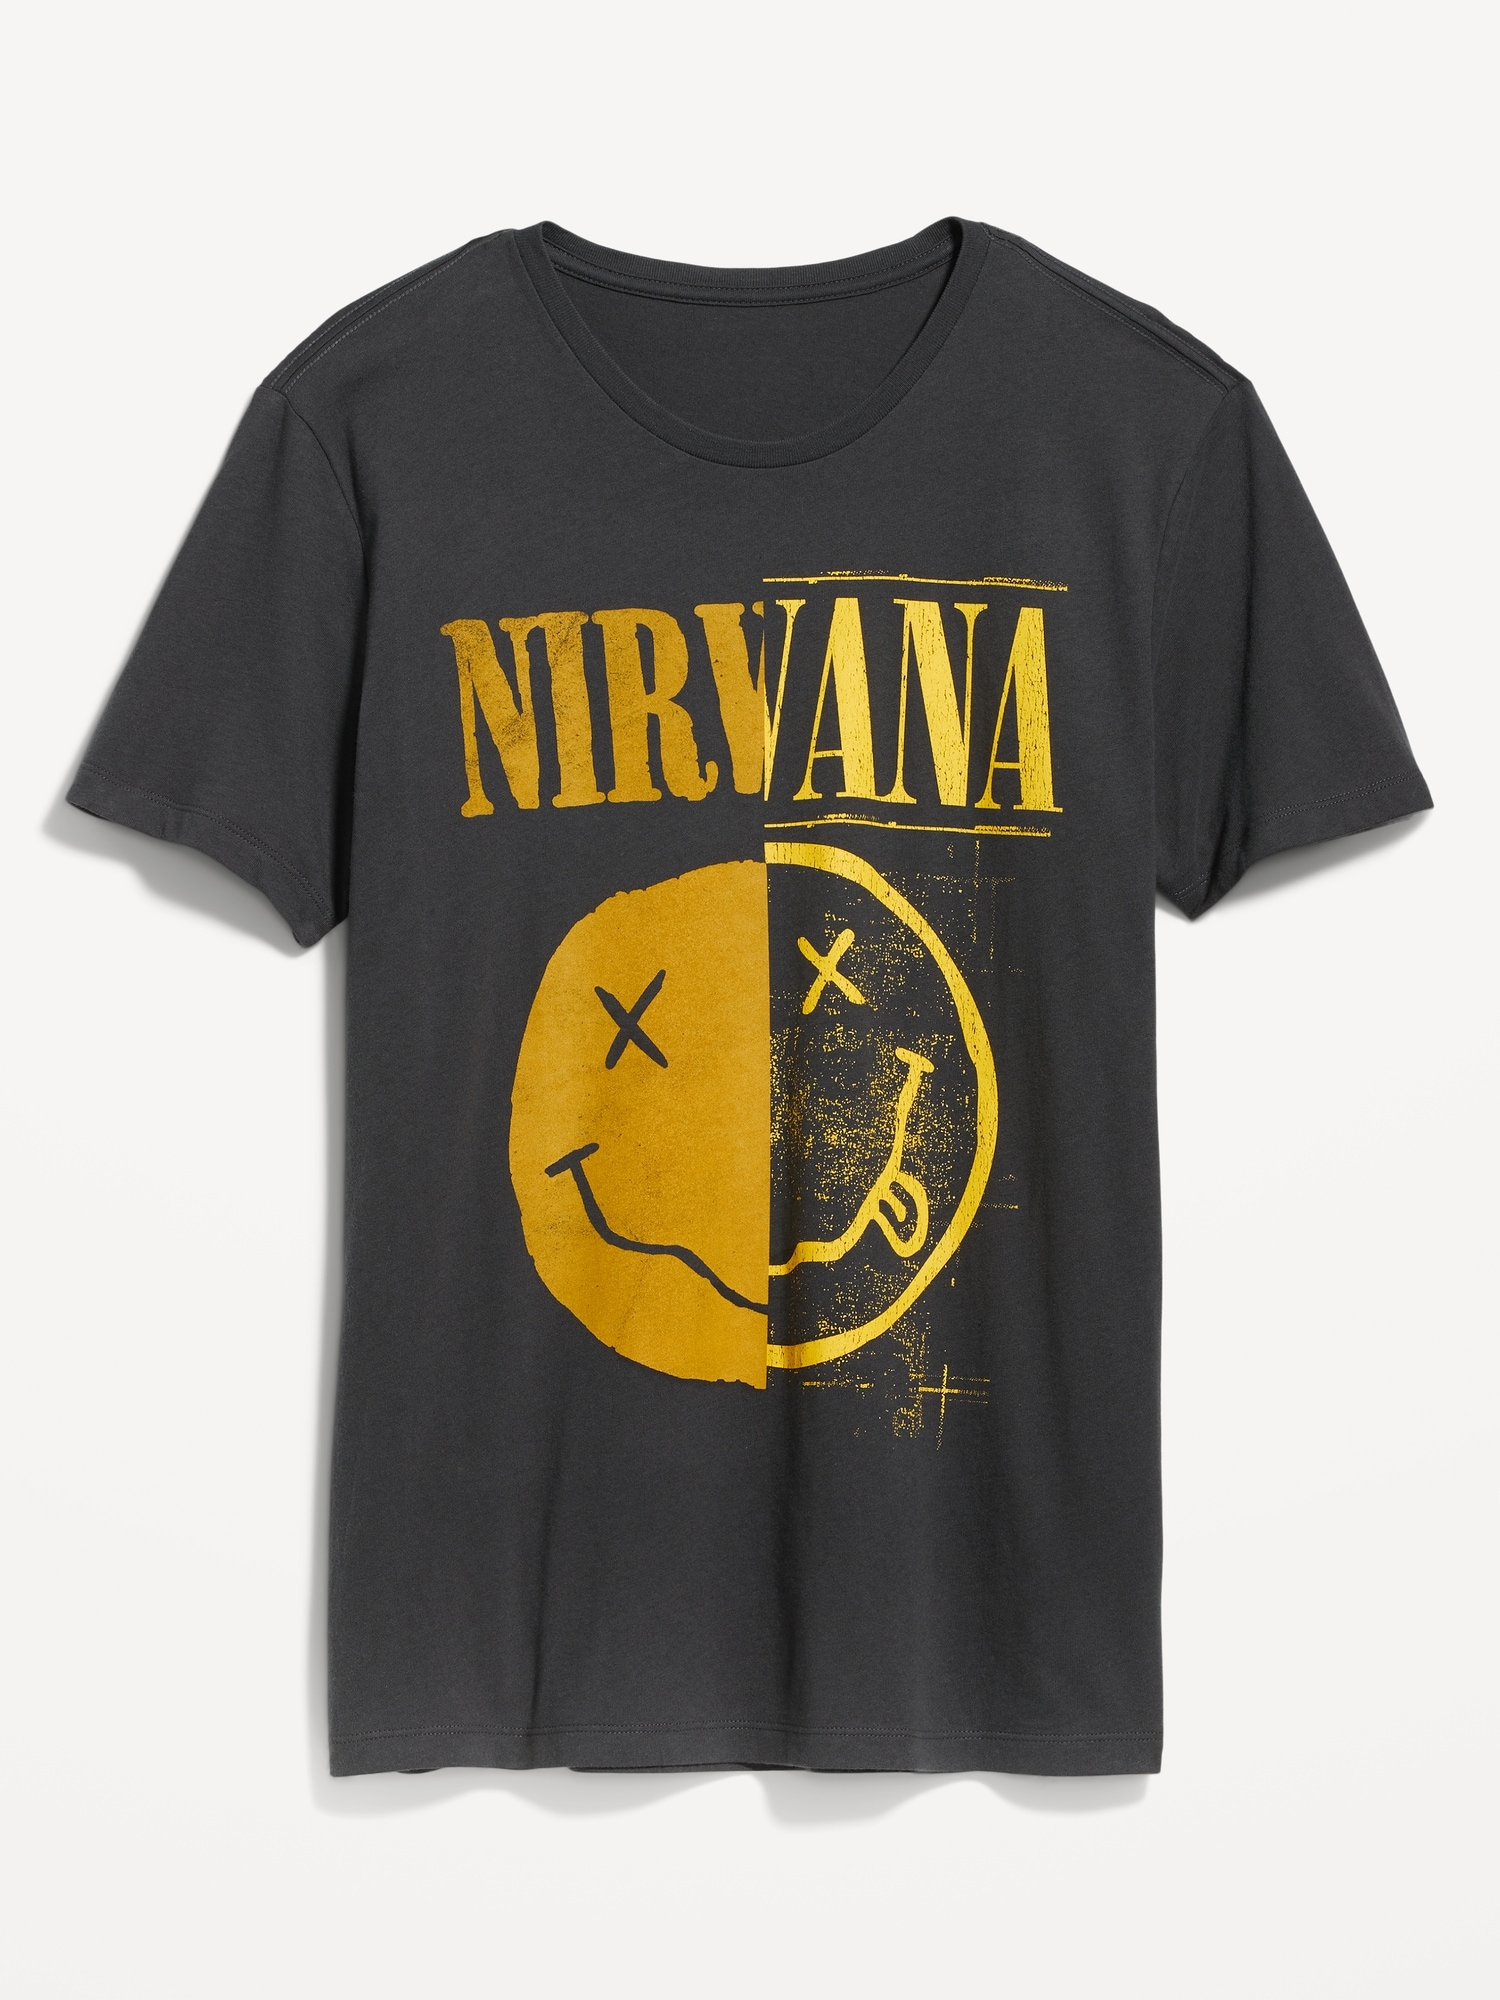 Nirvana™ Gender-Neutral T-Shirt for Adults